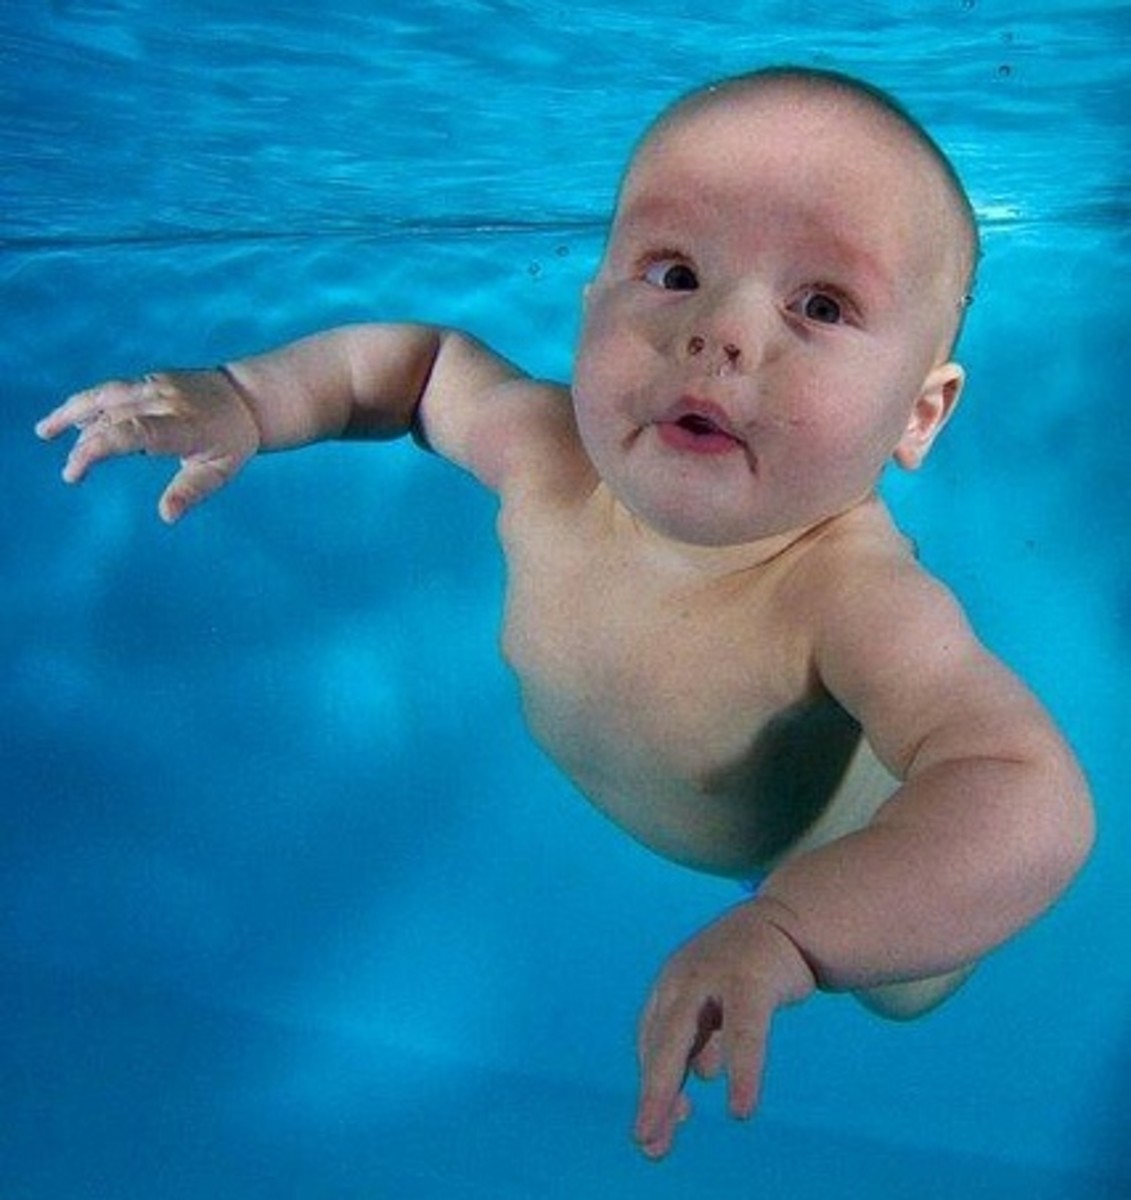 Even infants can learn to swim, or least learn how not to drown.